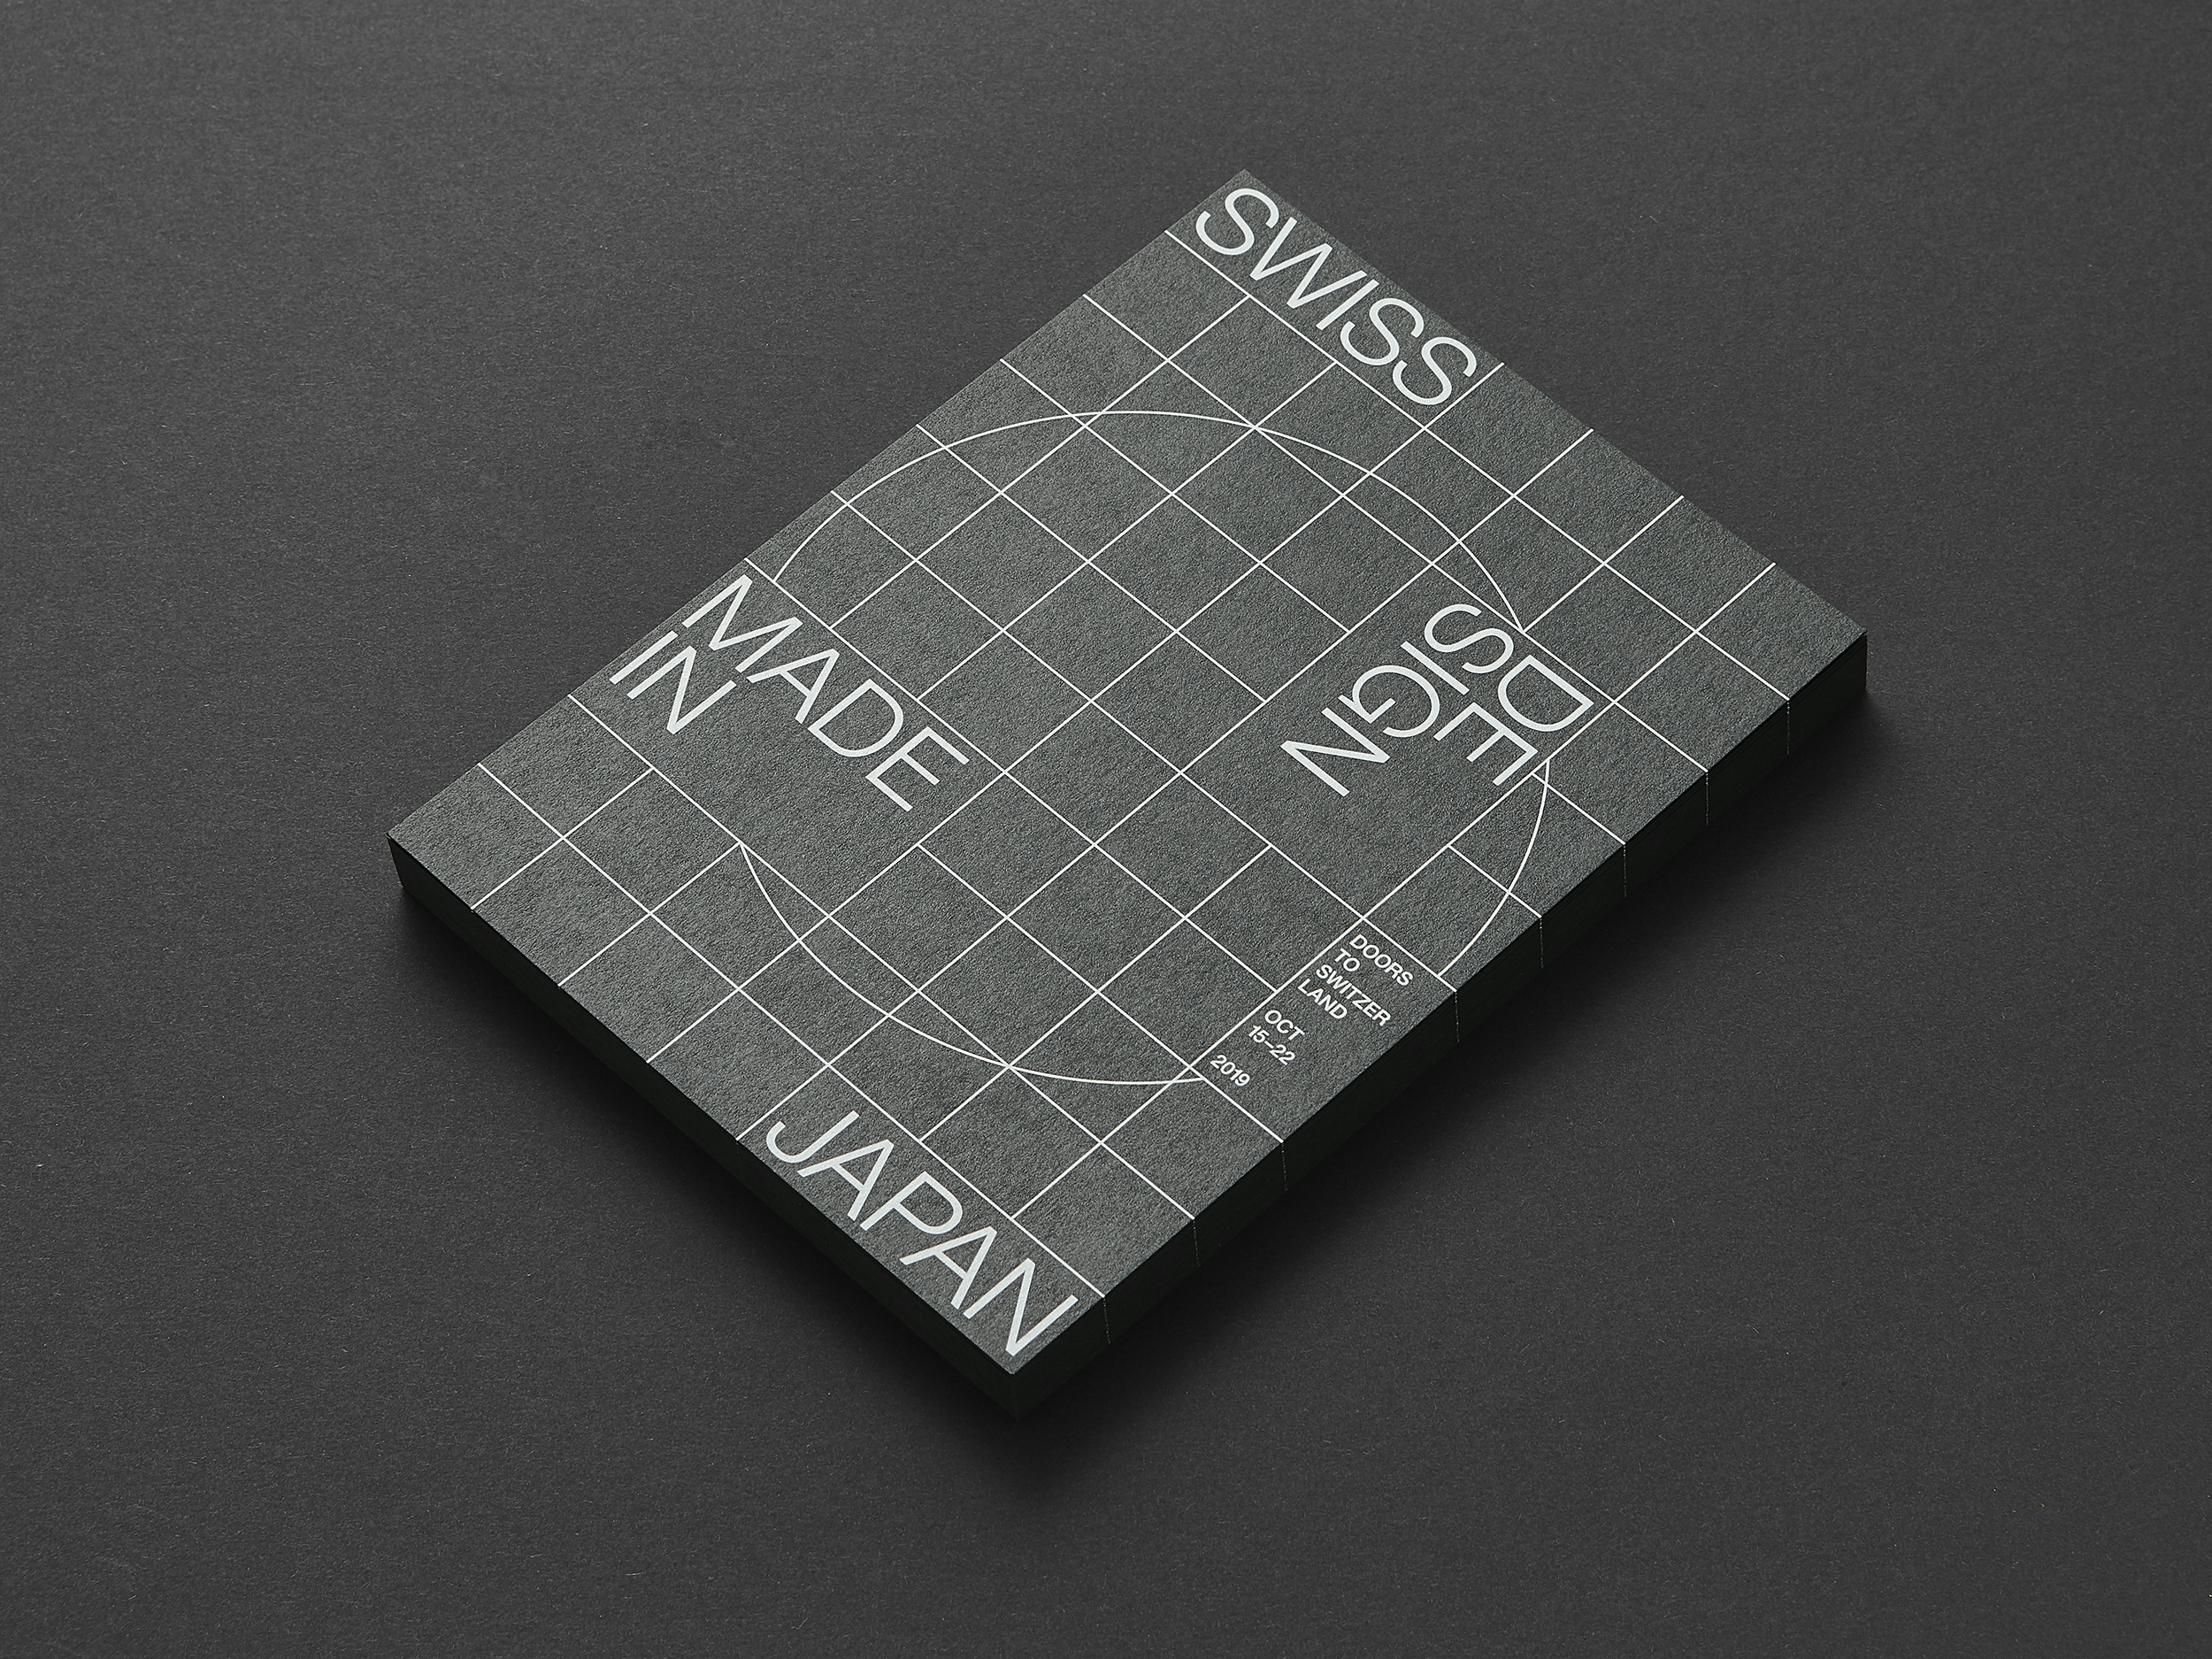 Swiss design made in japan card front